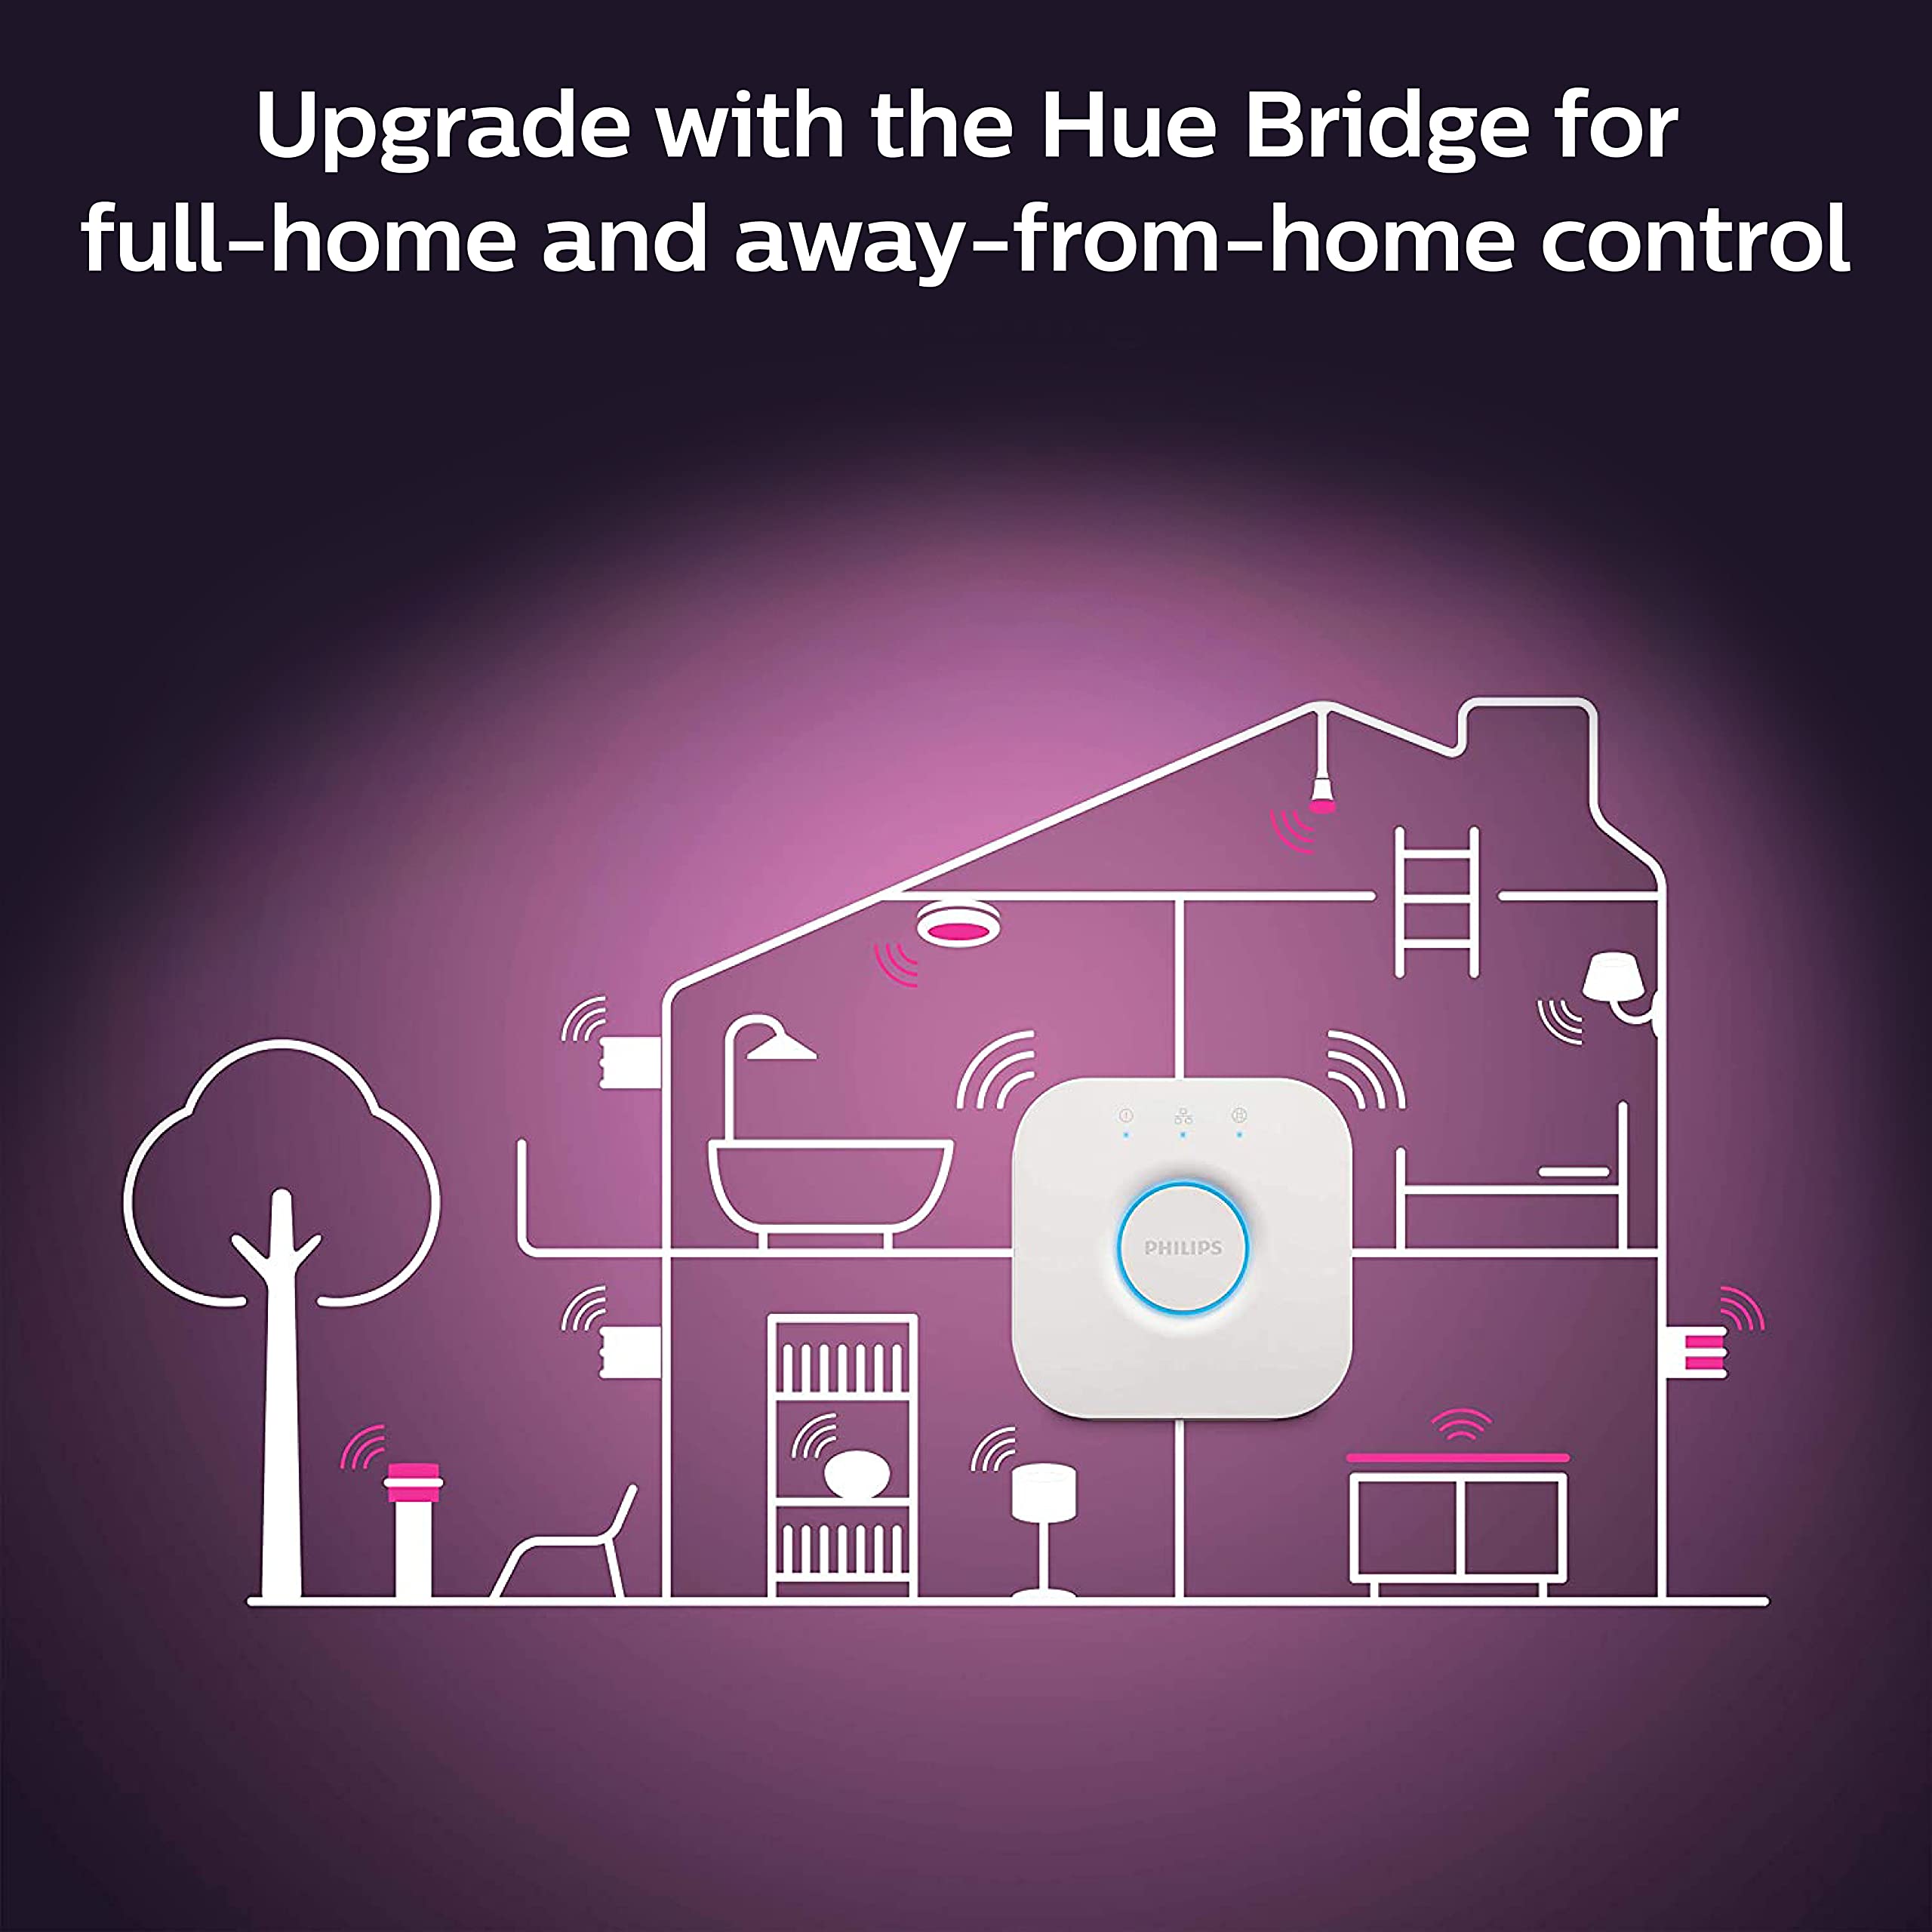 Philips Hue White and color Ambiance Extra Bright High Lumen Dimmable LED Smart Retrofit Recessed 4